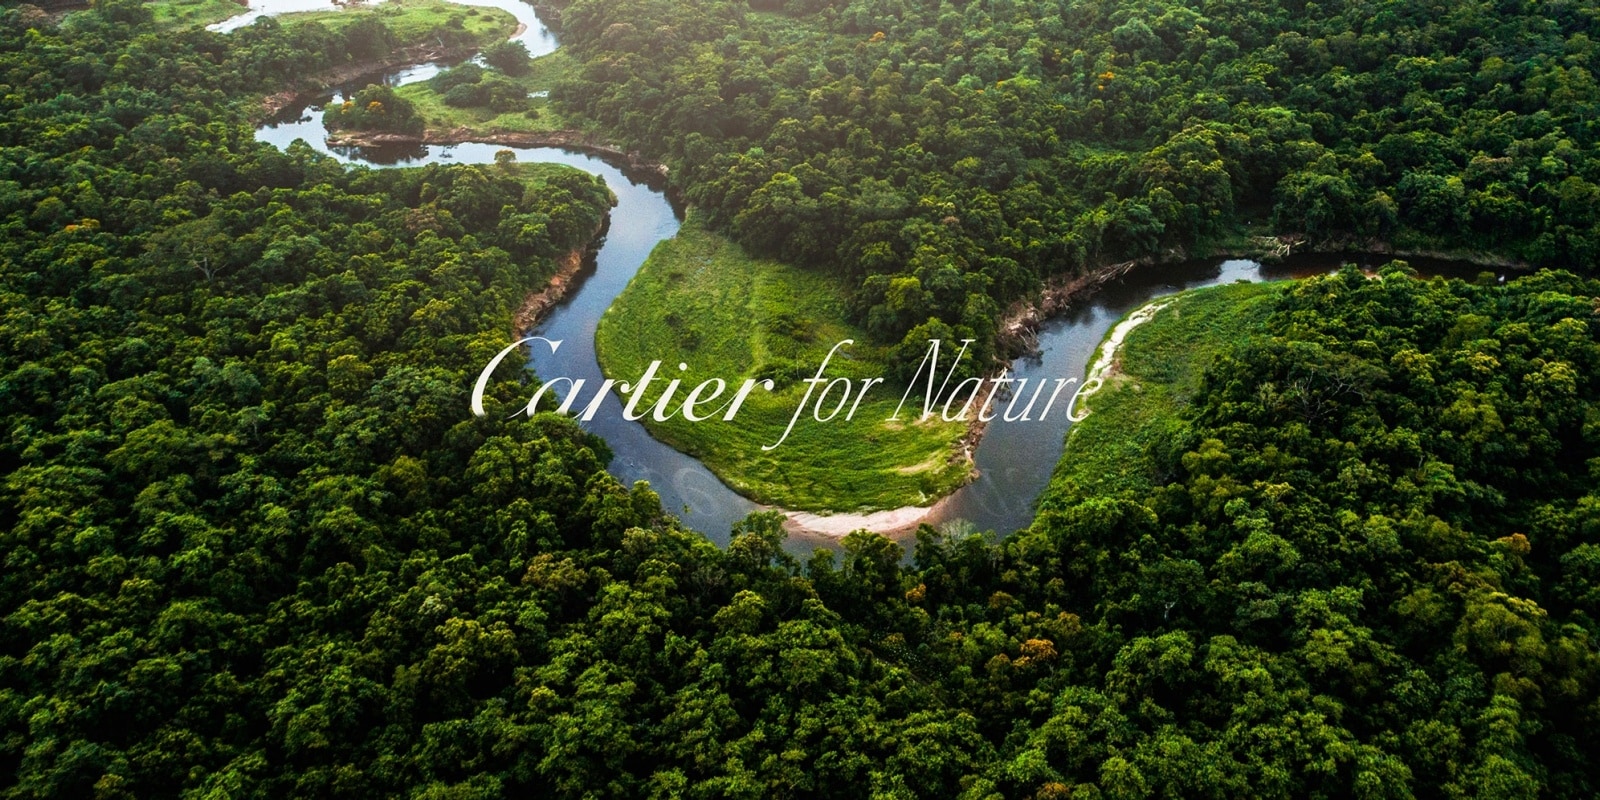 cartier for nature